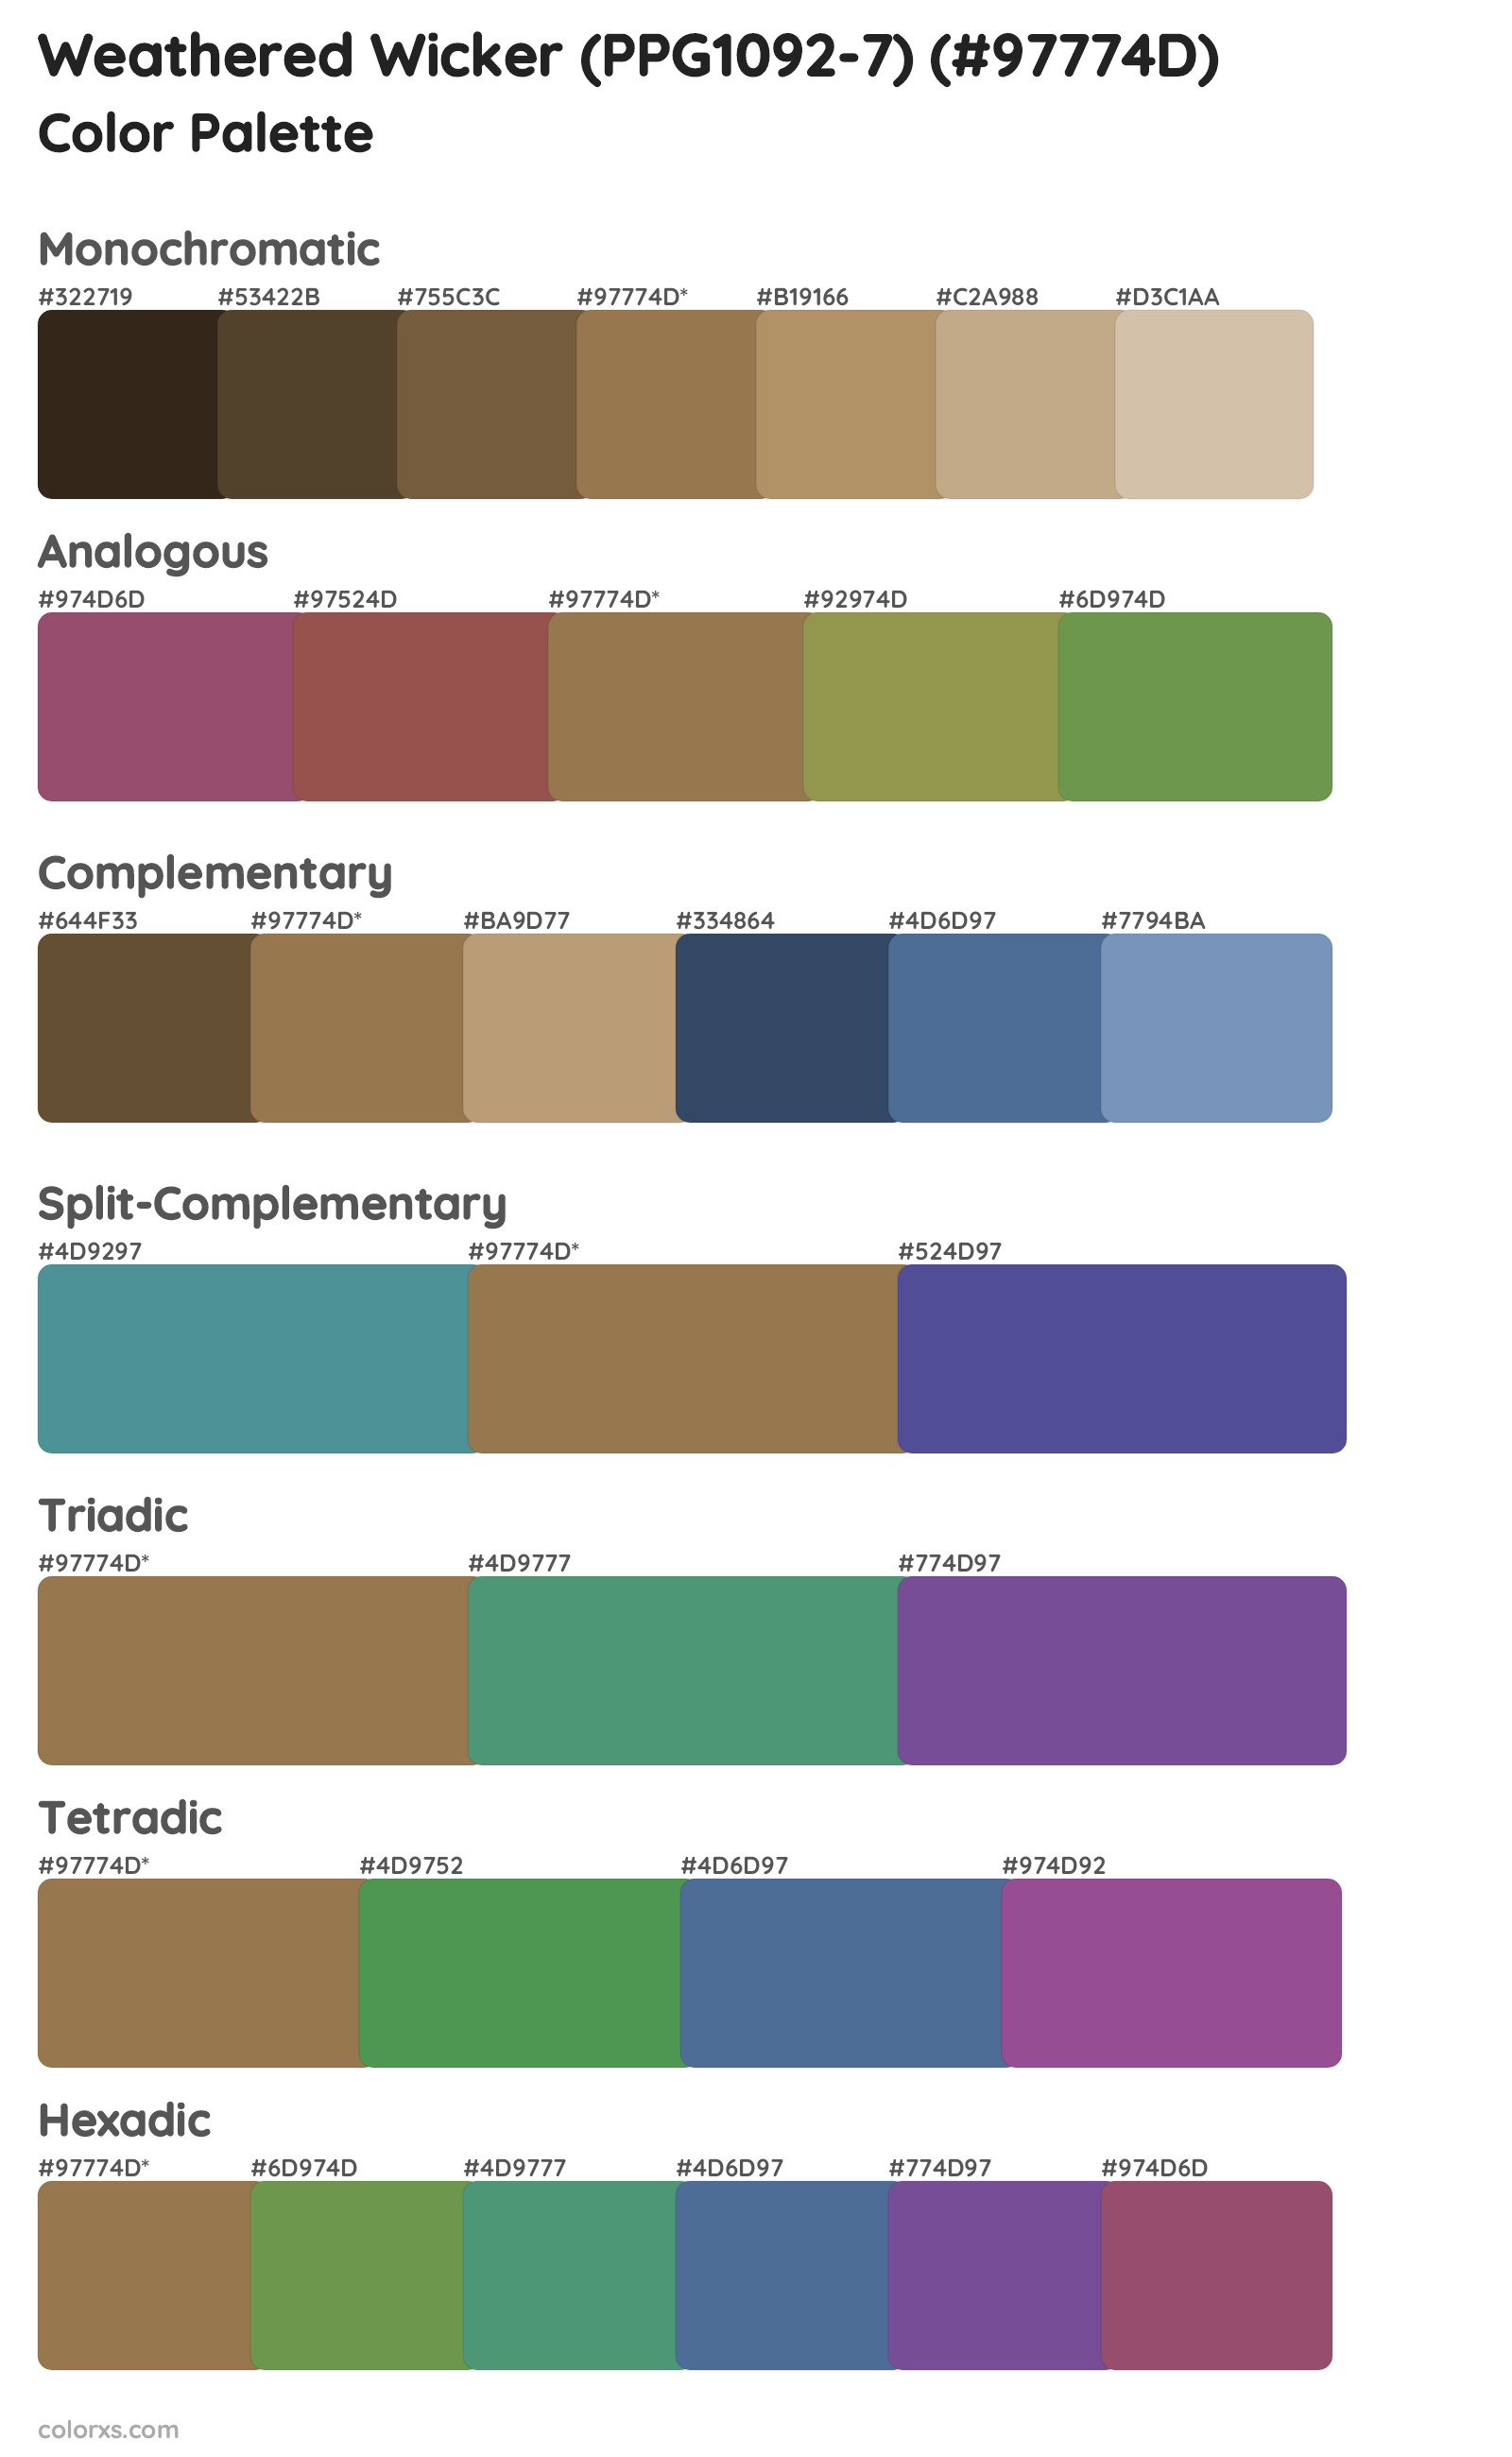 Weathered Wicker (PPG1092-7) Color Scheme Palettes